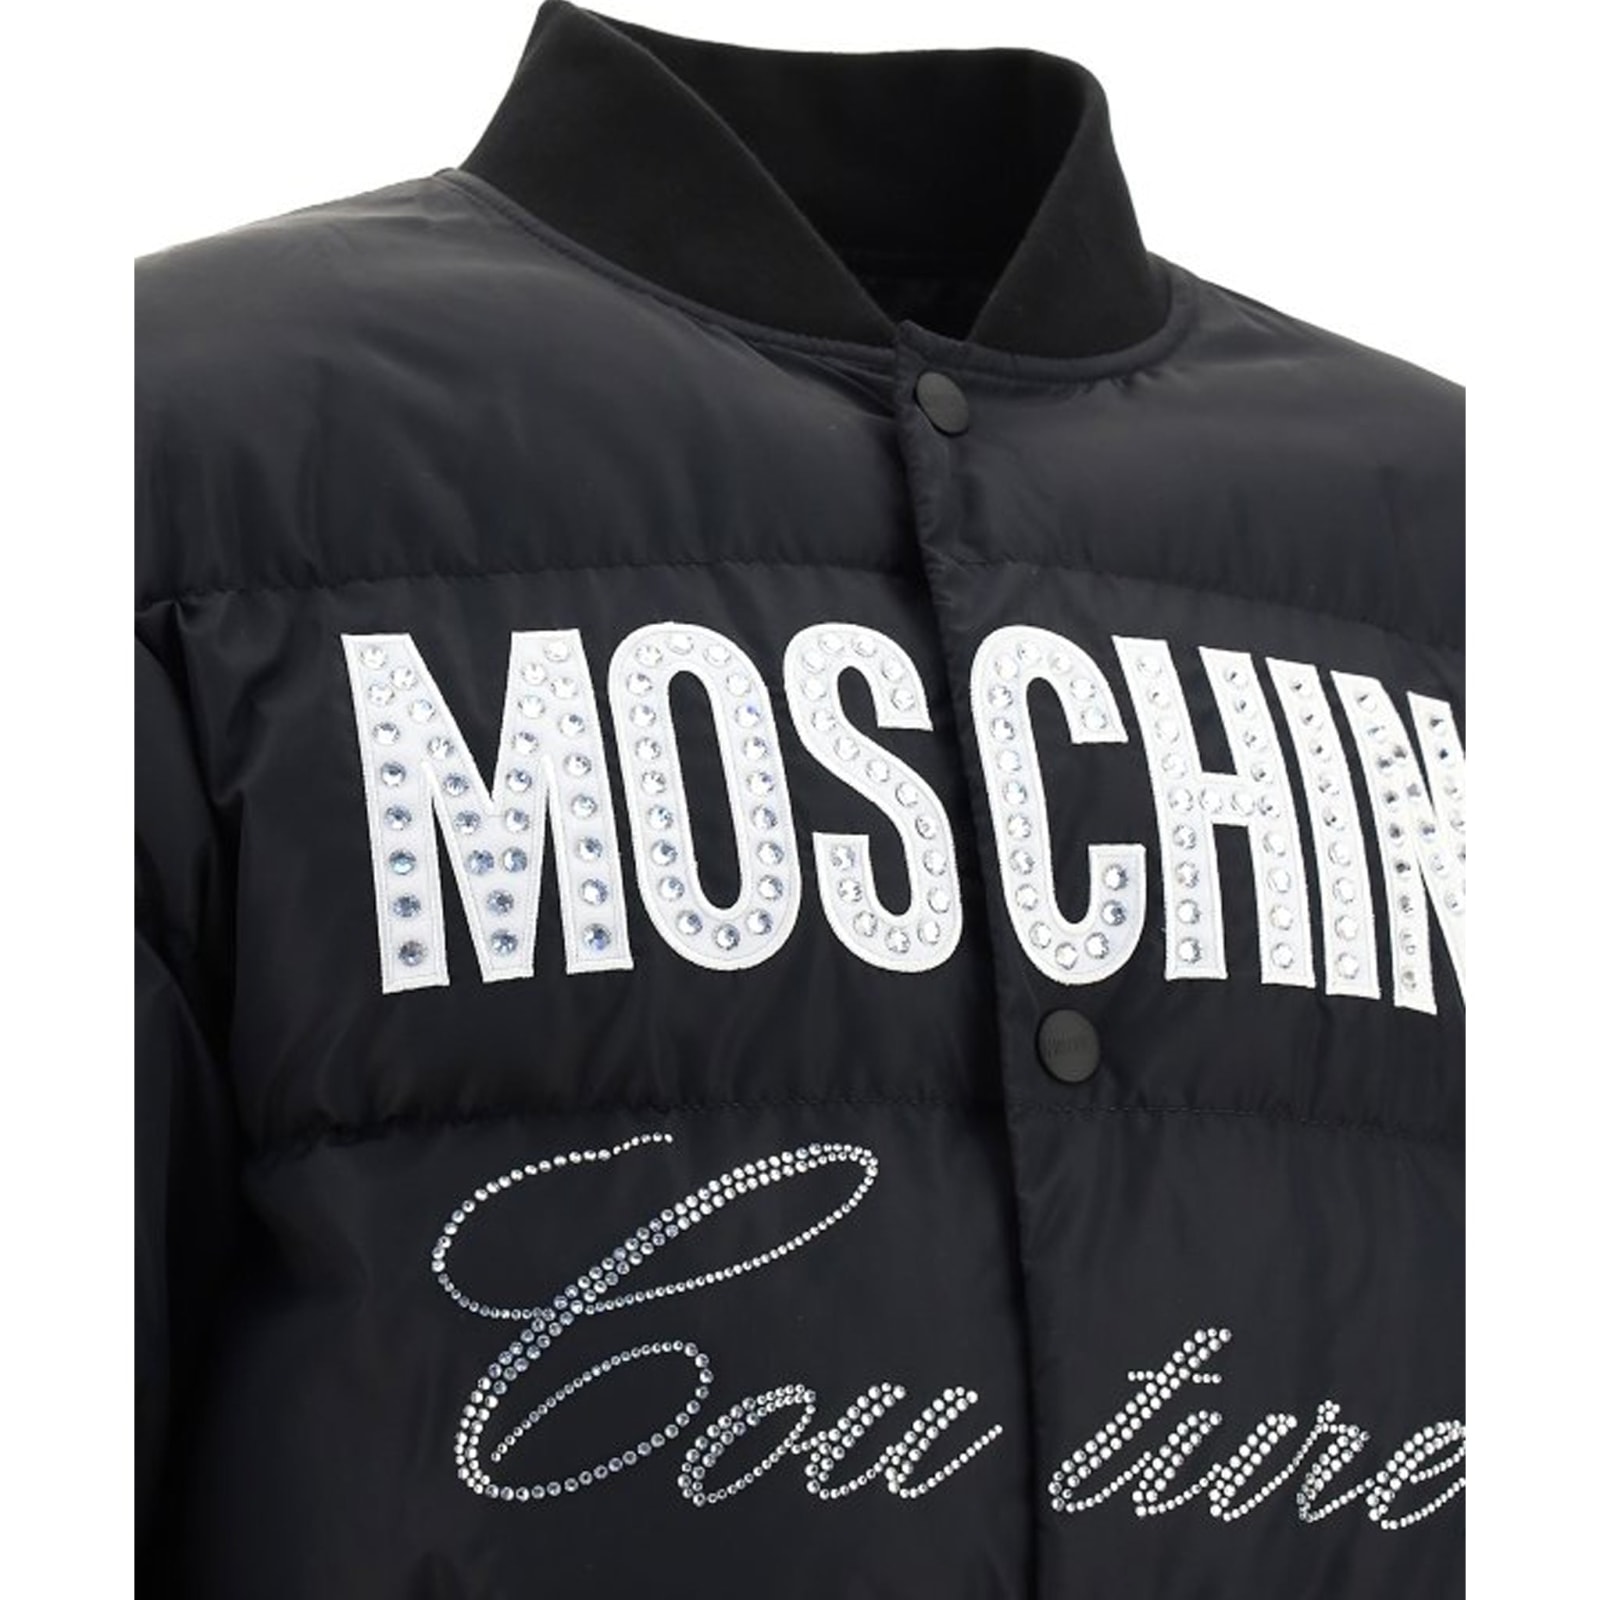 Shop Moschino Couture Bomber Jacket In Black